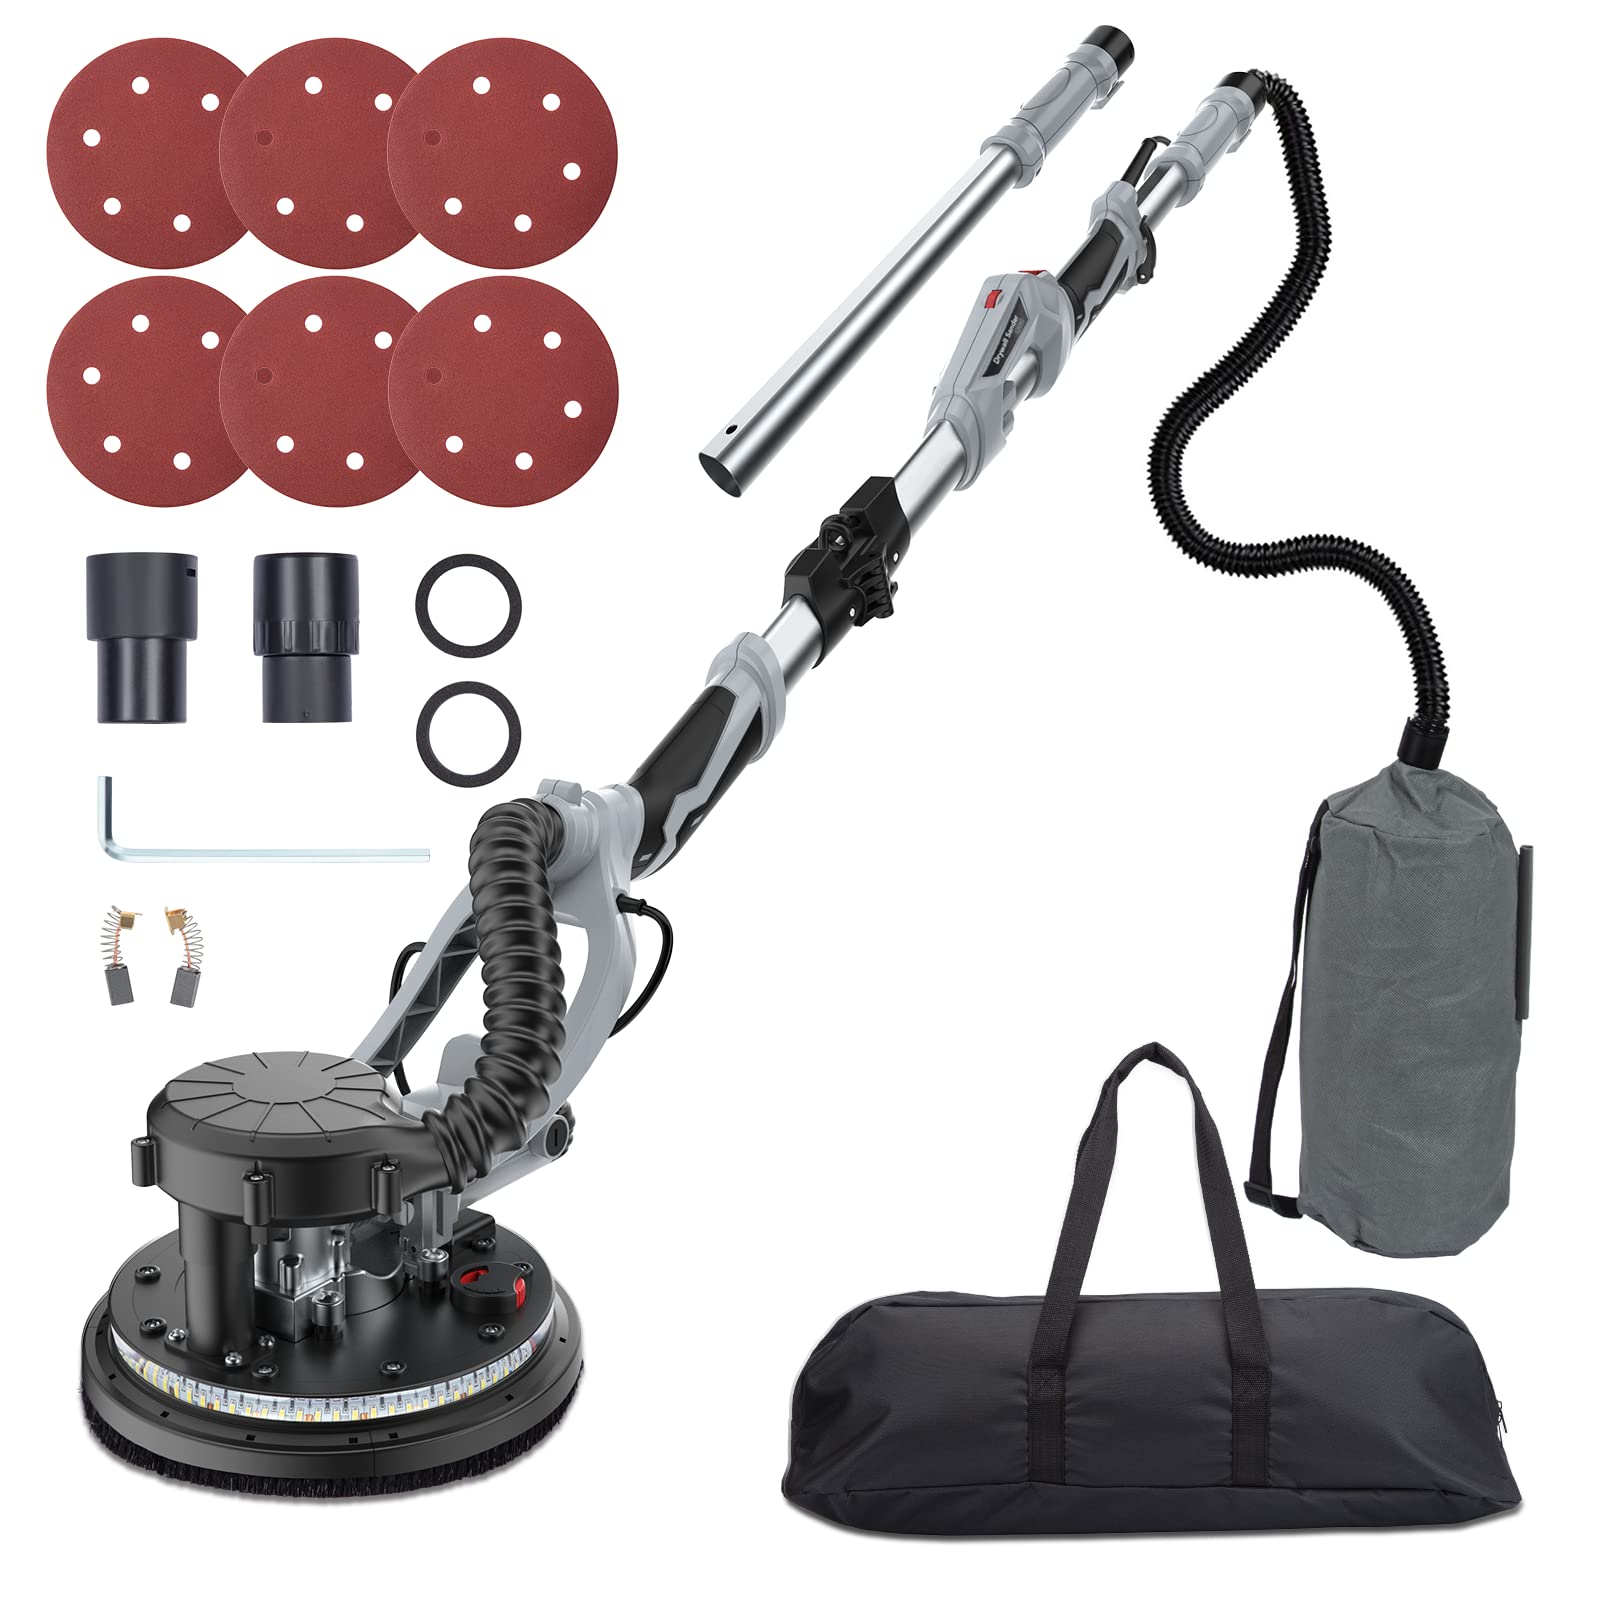 Advanced 800W Electric Drywall Sander, Variable Speed, Telescopic Handle, LED Light, and Vacuum Bag